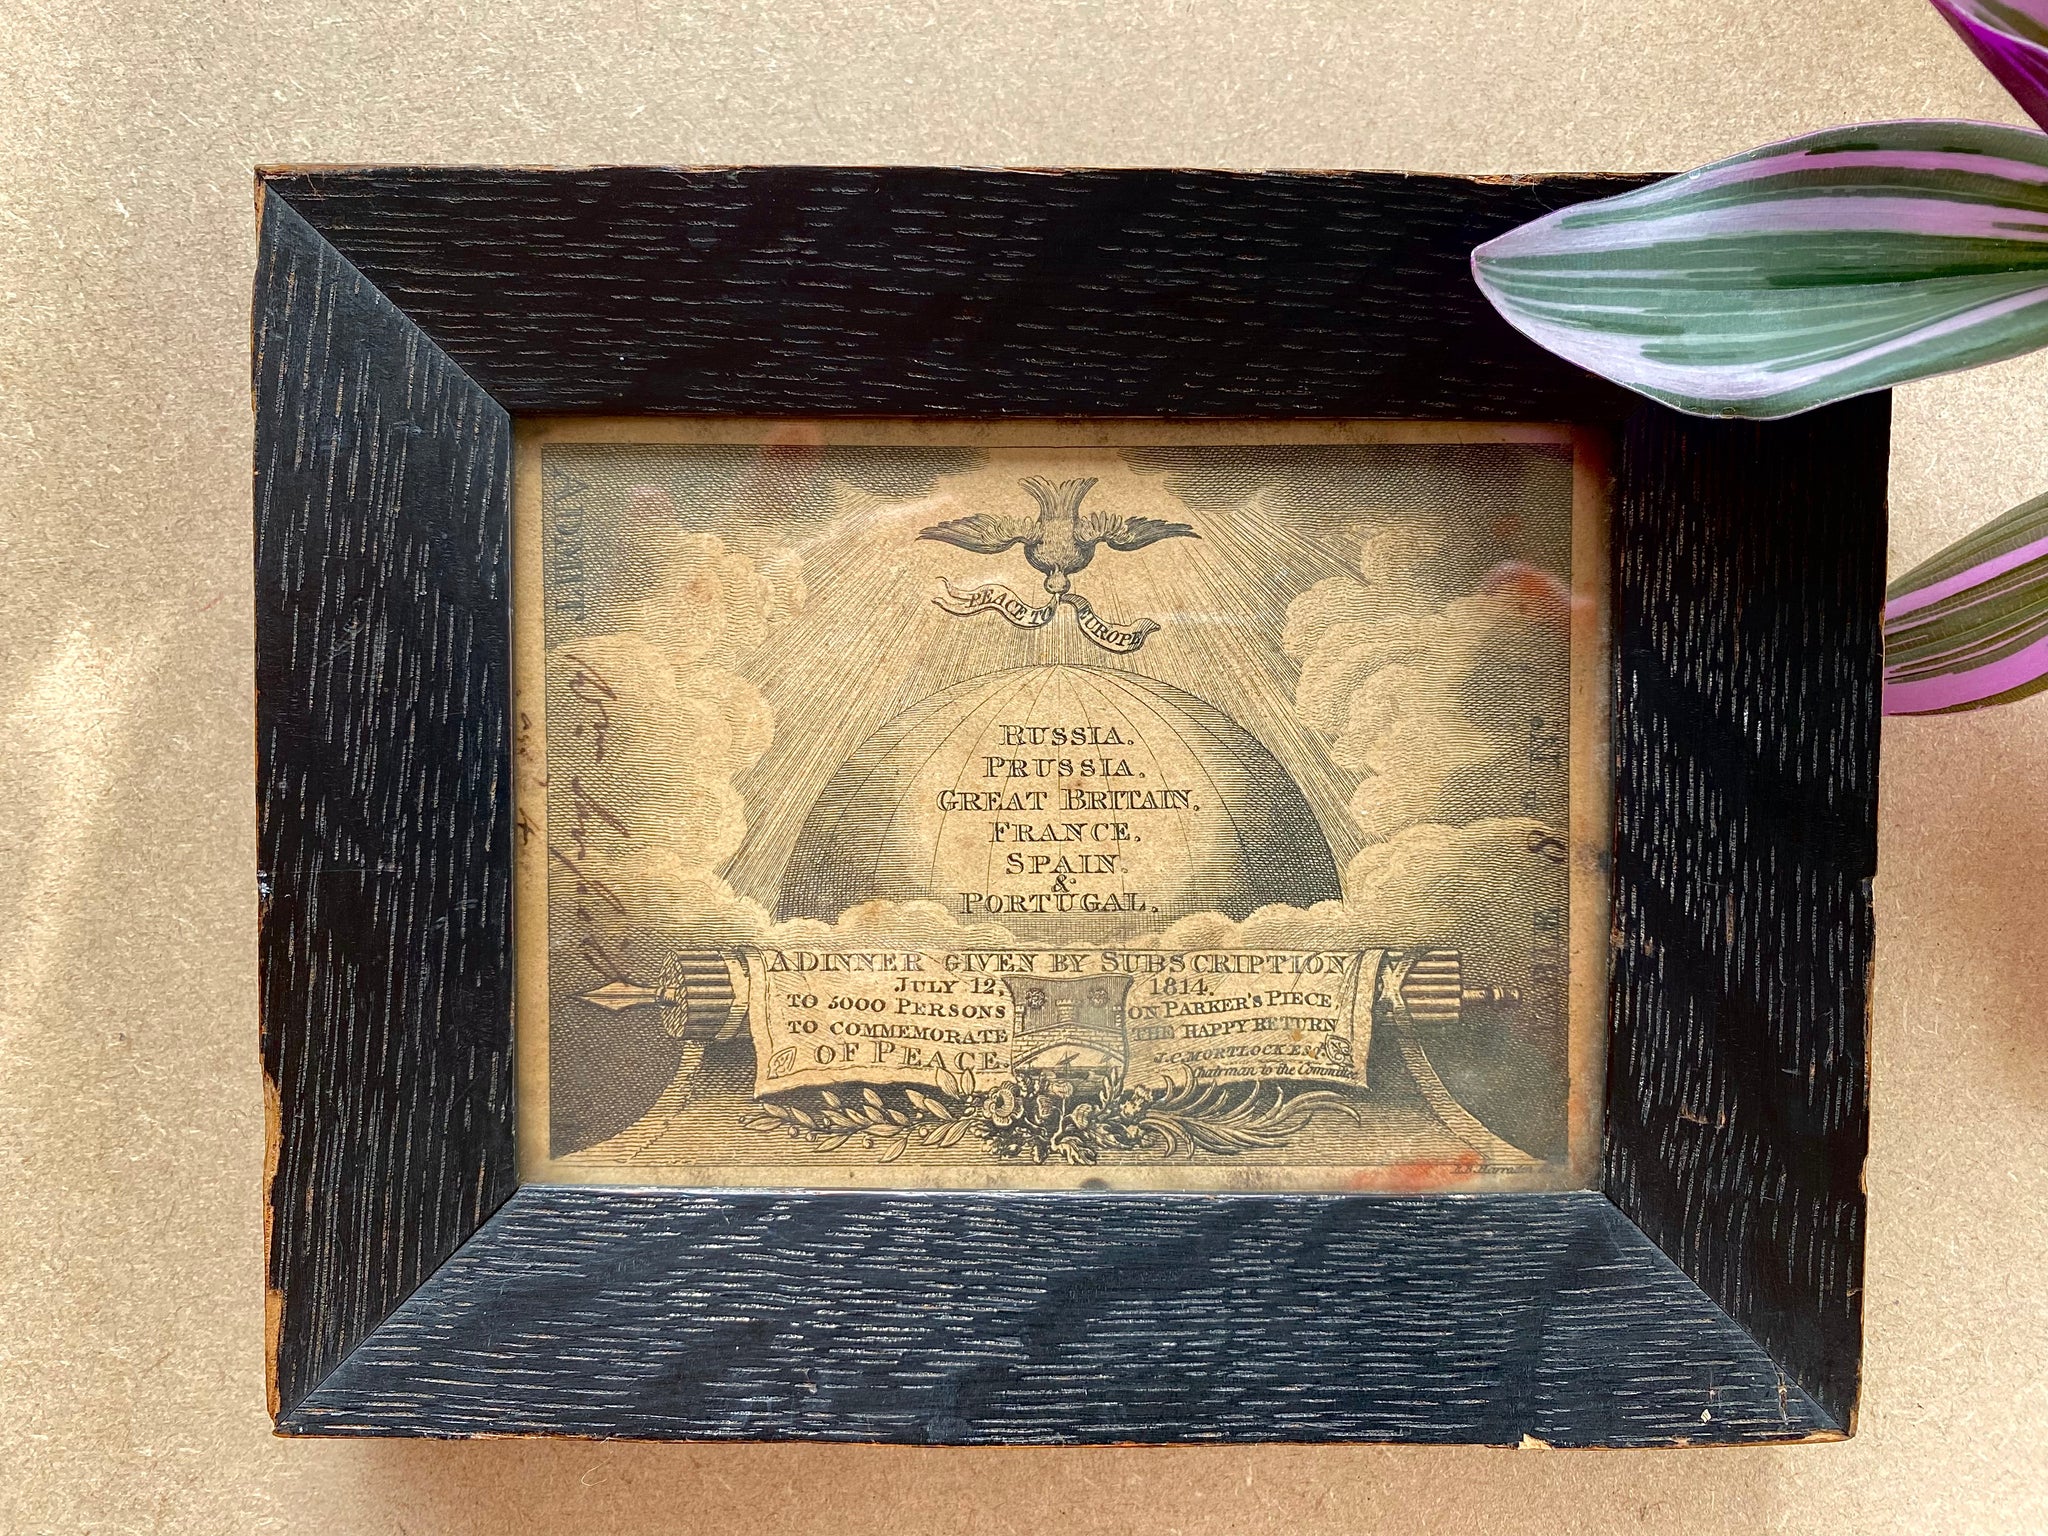 A Very Rare Framed Invitation To Peace Festival To Mark End Of Napoleonic Wars Dated 1814 - Source Vintage